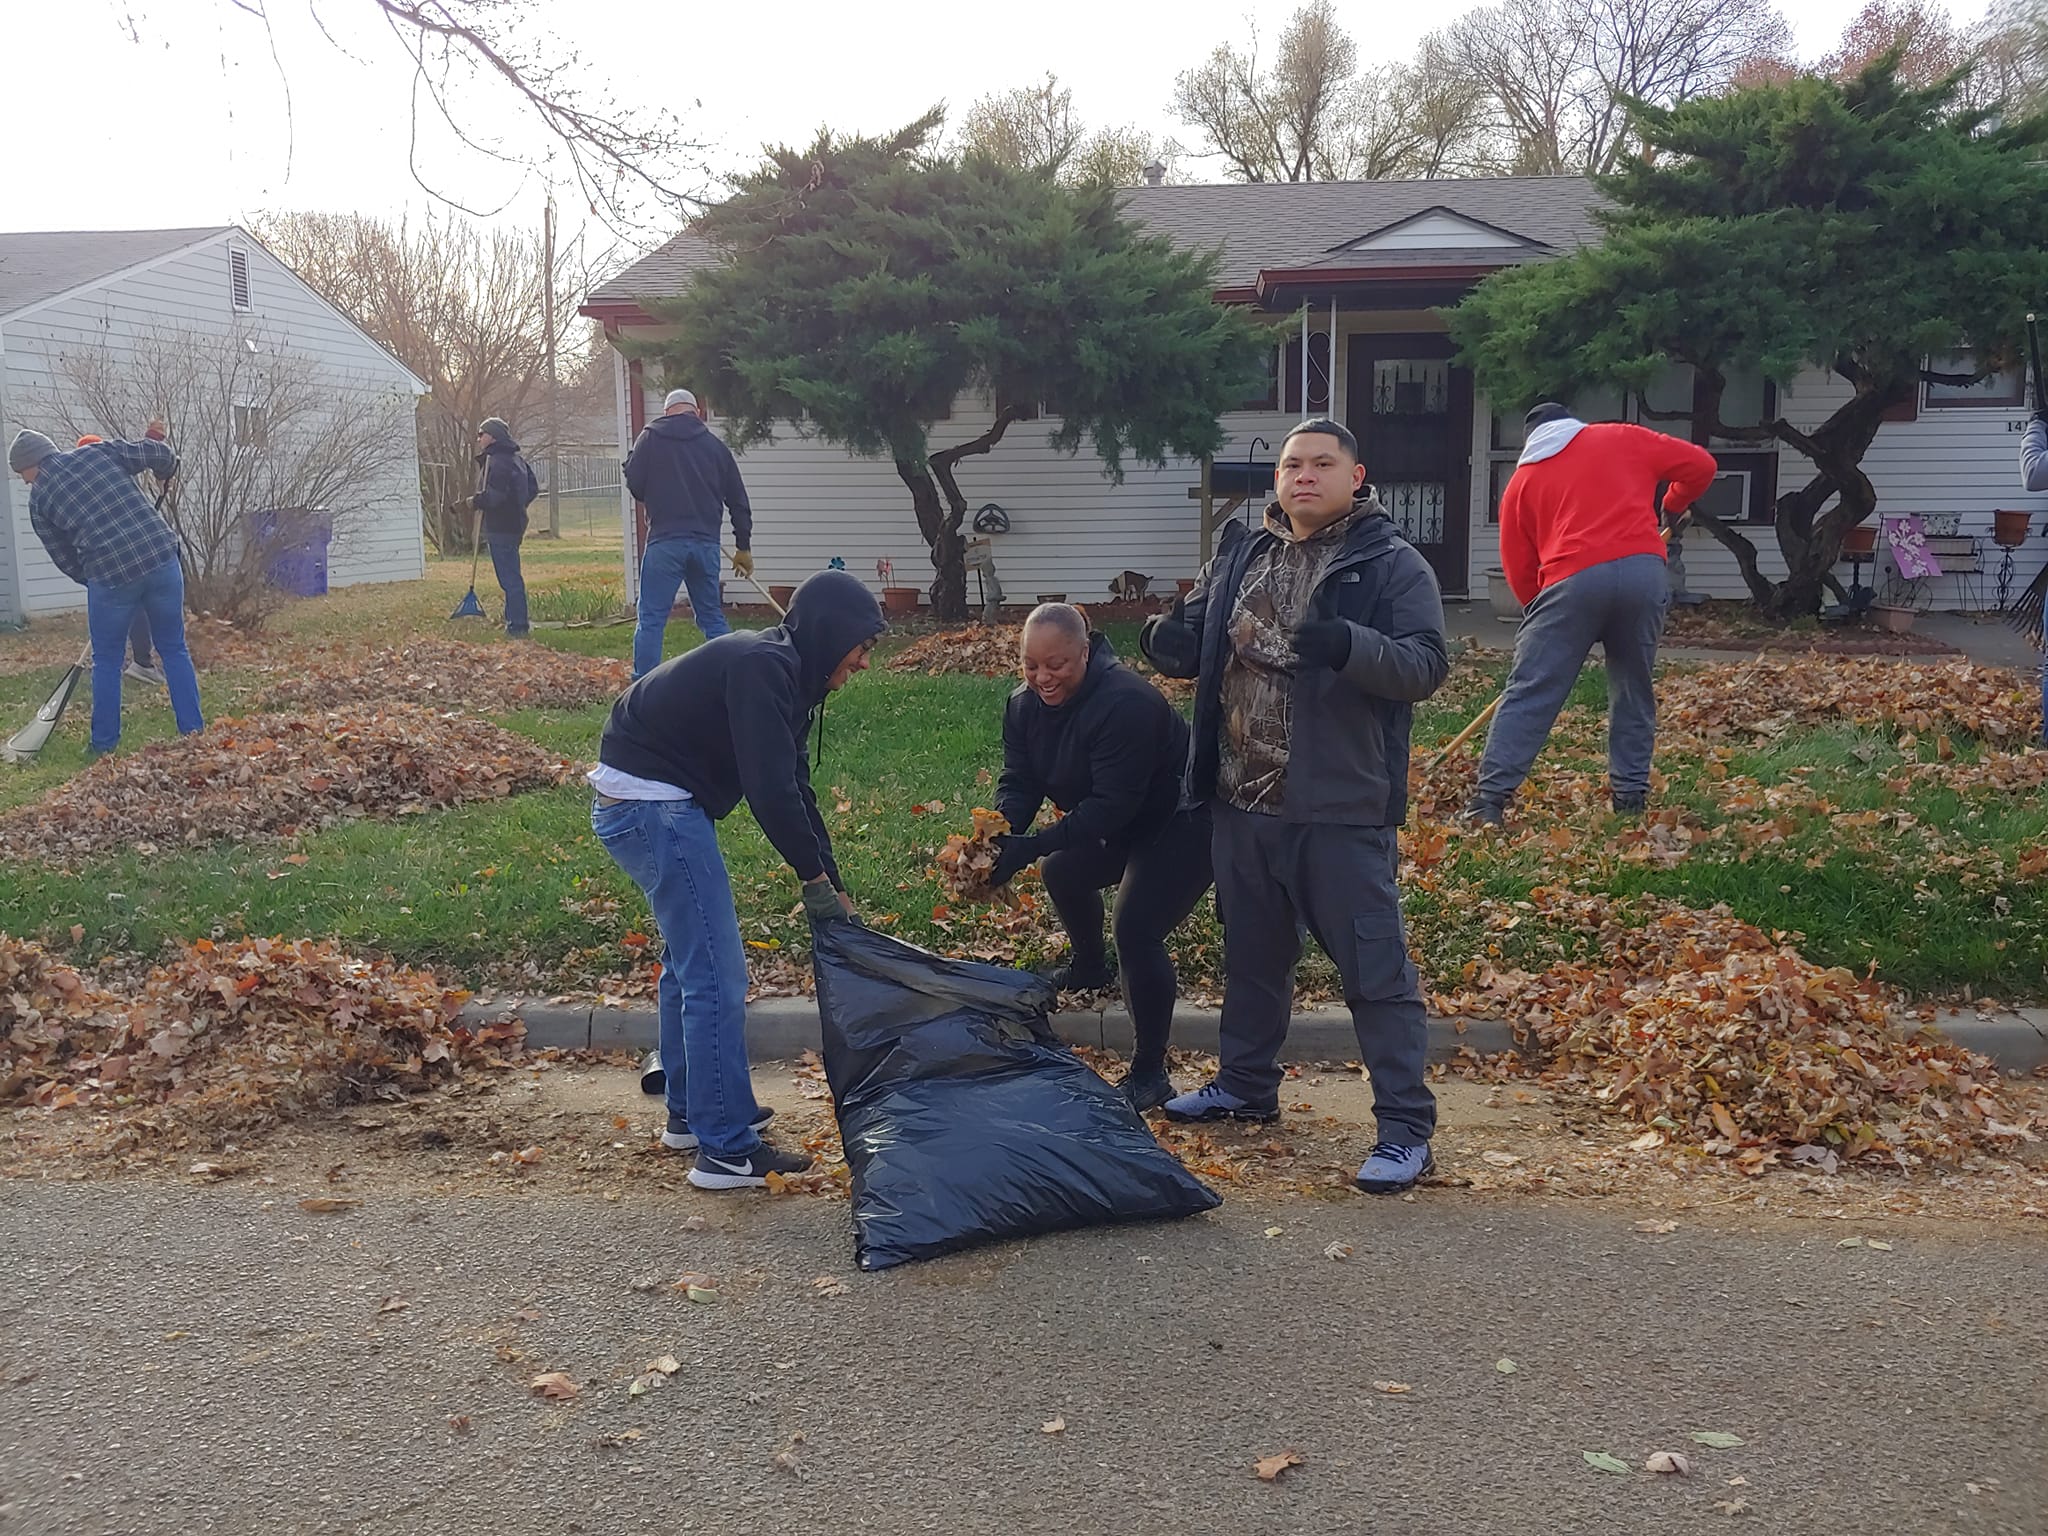 Volunteers come out to rake leaves and care for our elderly neighbors.